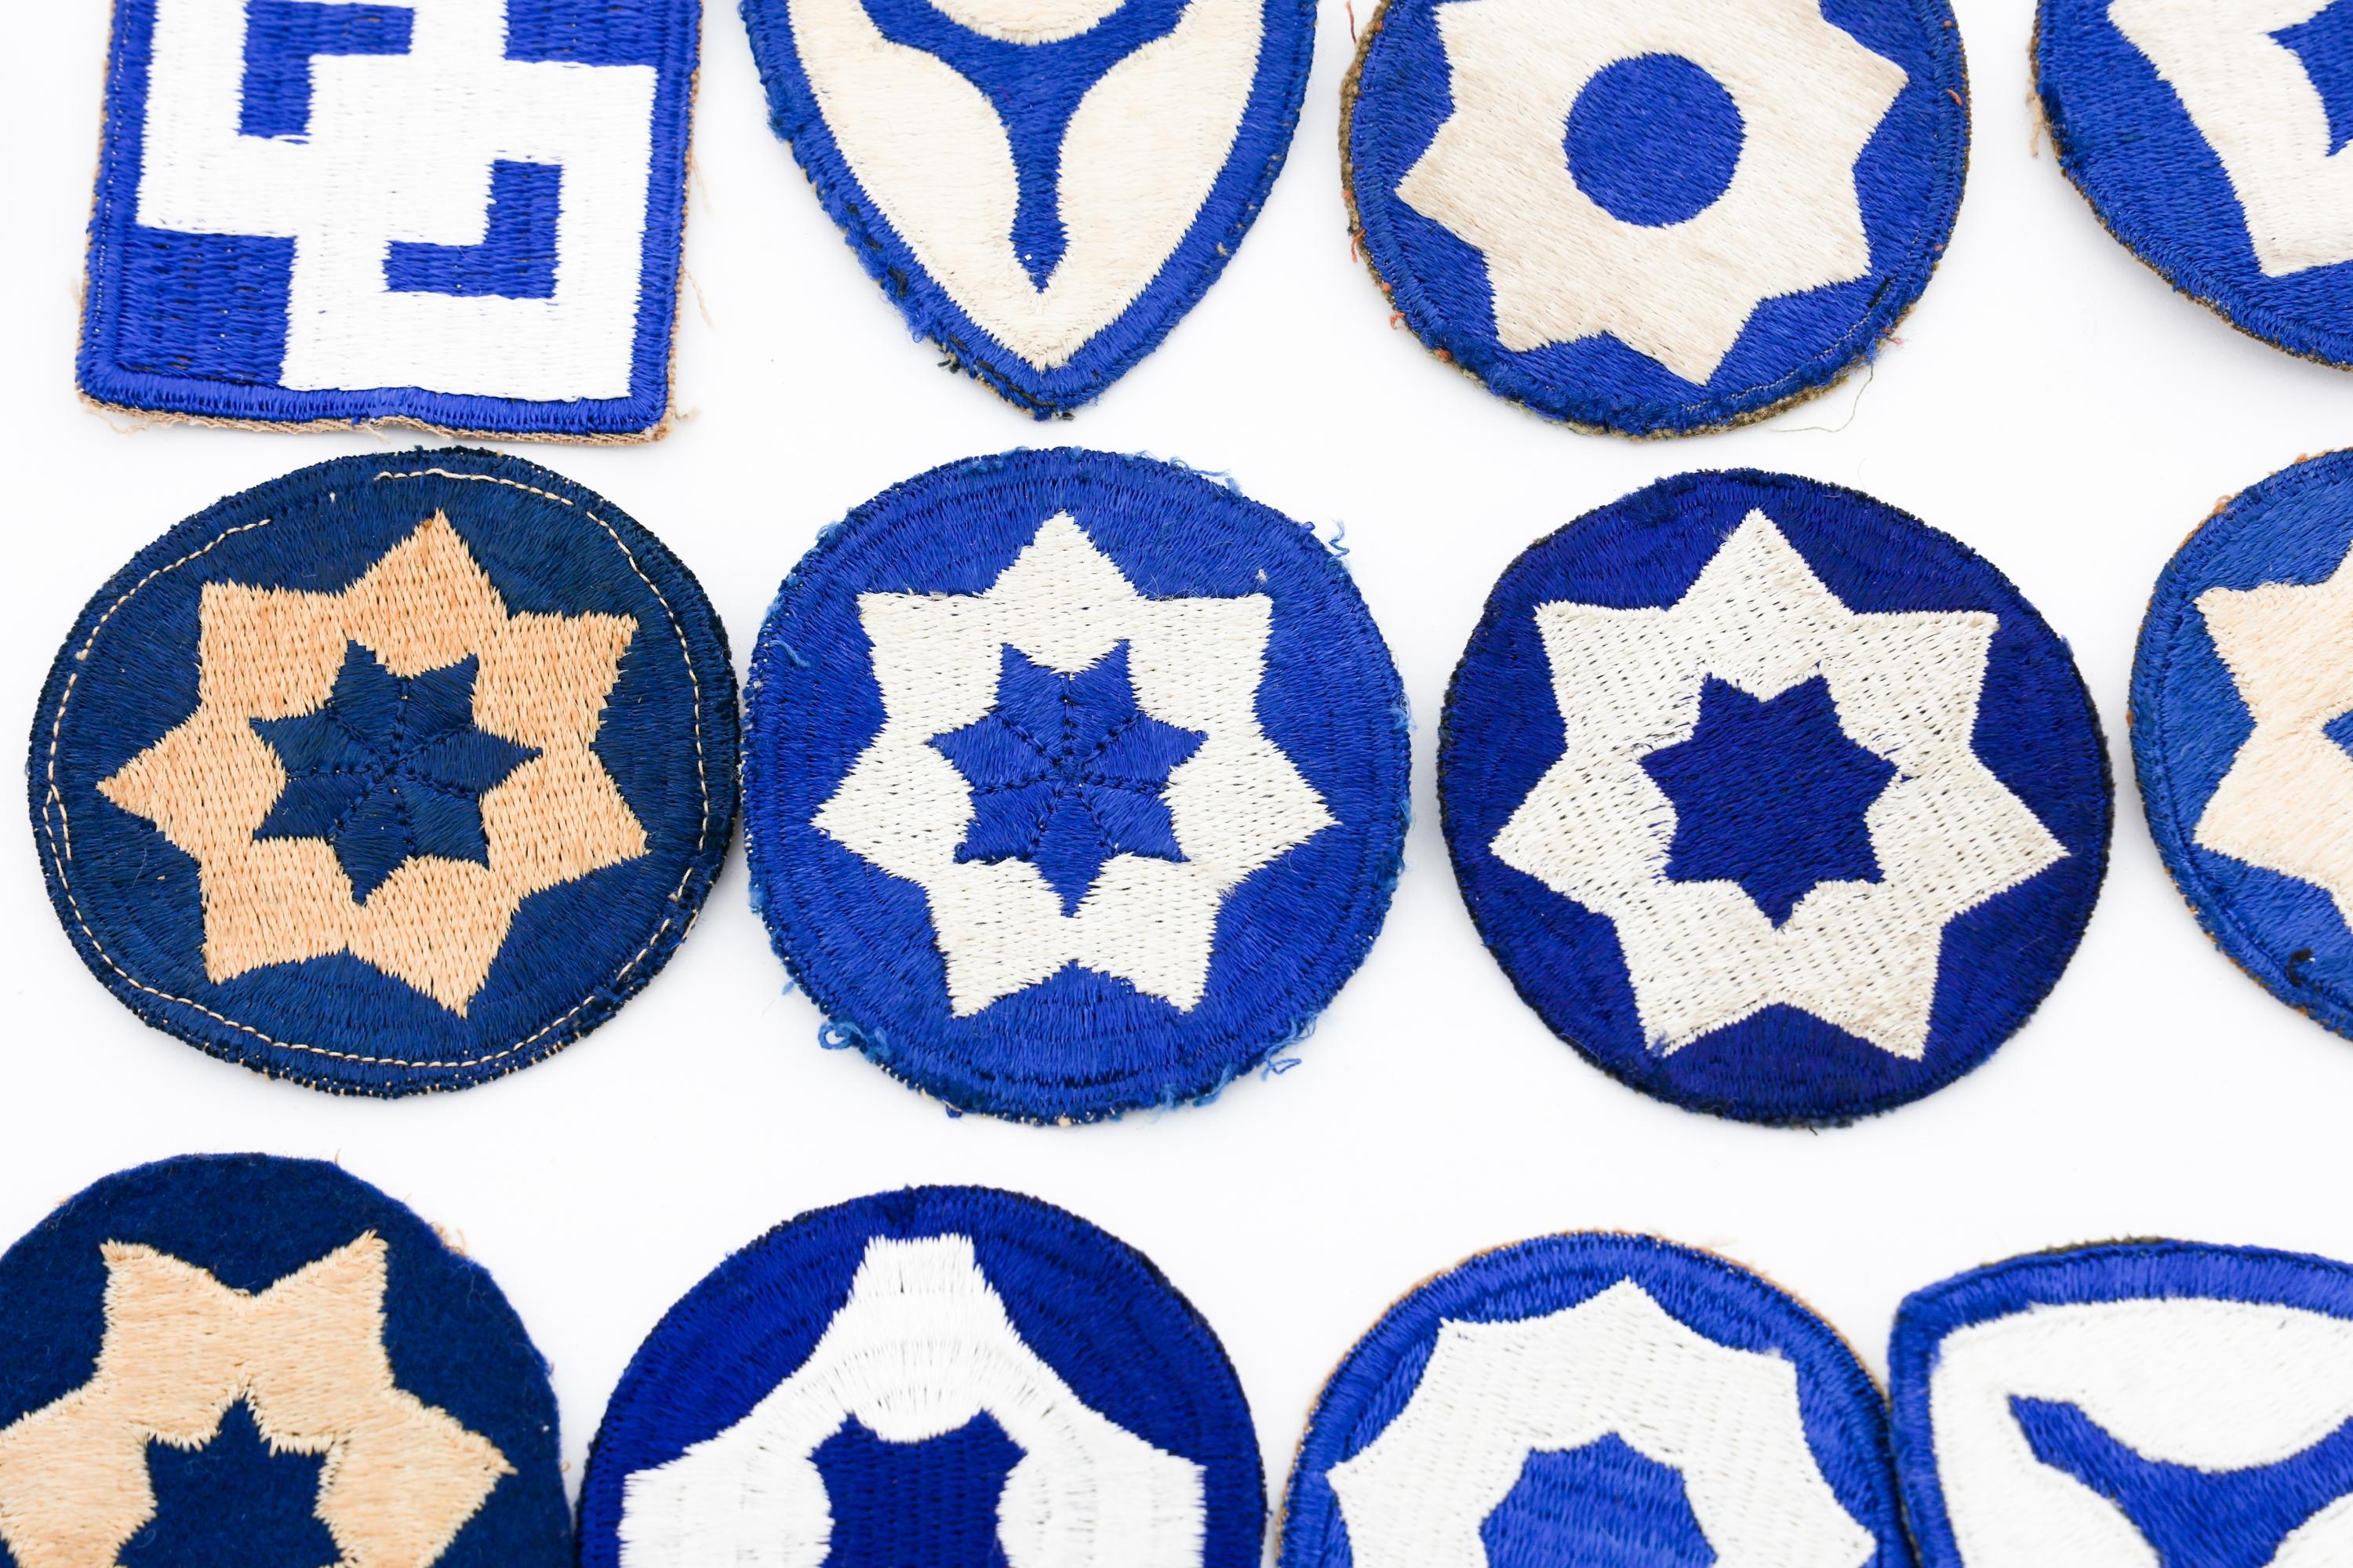 WWII - POST WAR US ARMY SERVICE COMMAND PATCHES